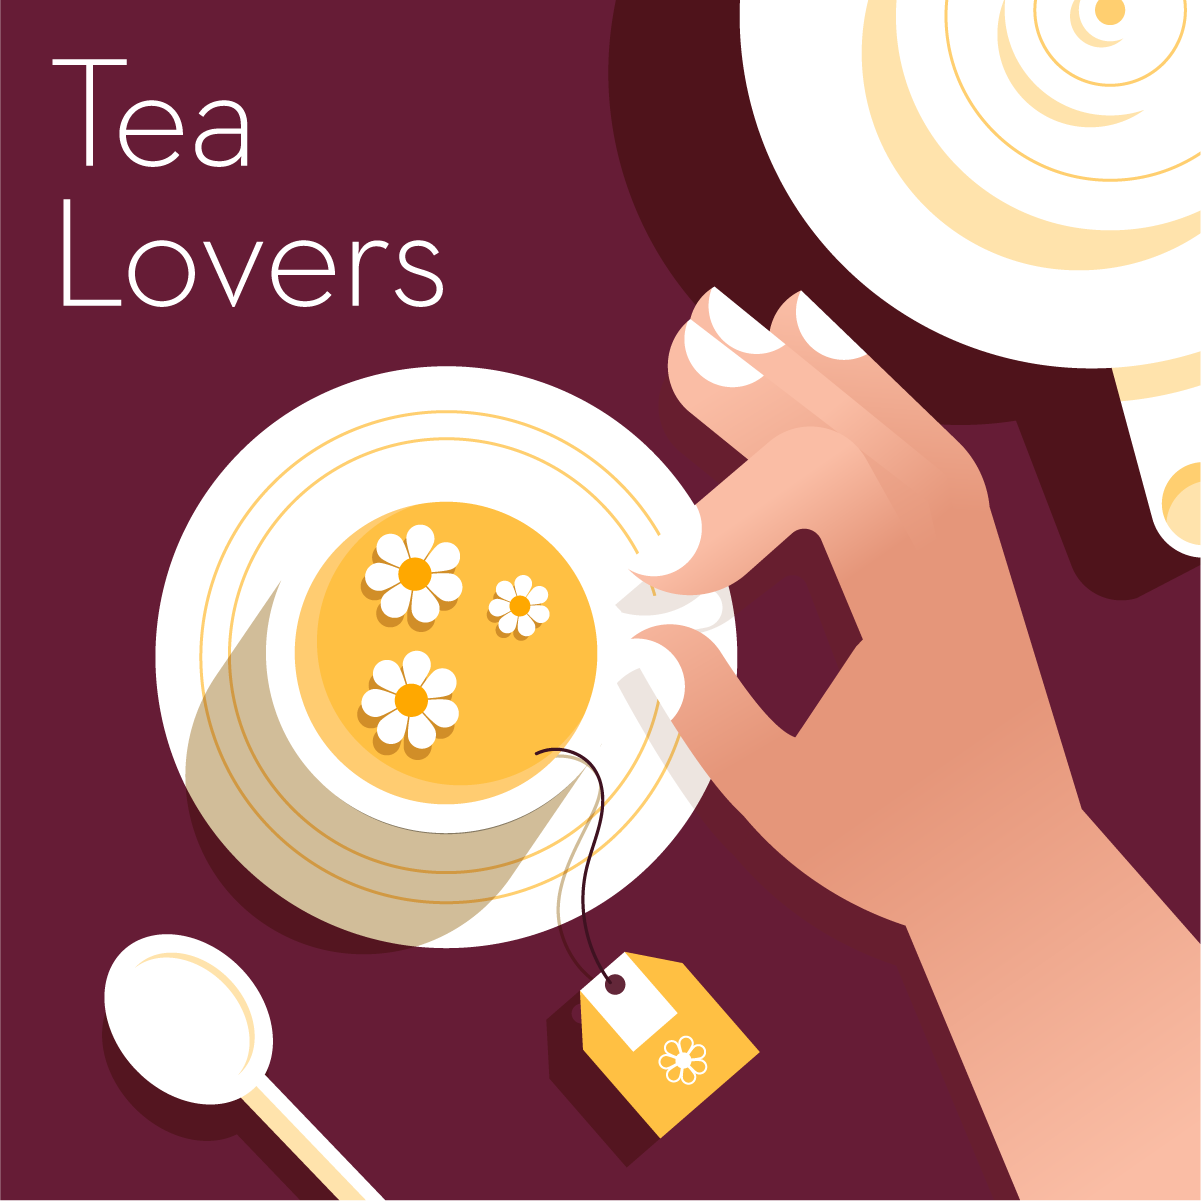 Illustration of a gift guide containing gifts for tea lovers, showing a cup of tea with flowers floating on top.